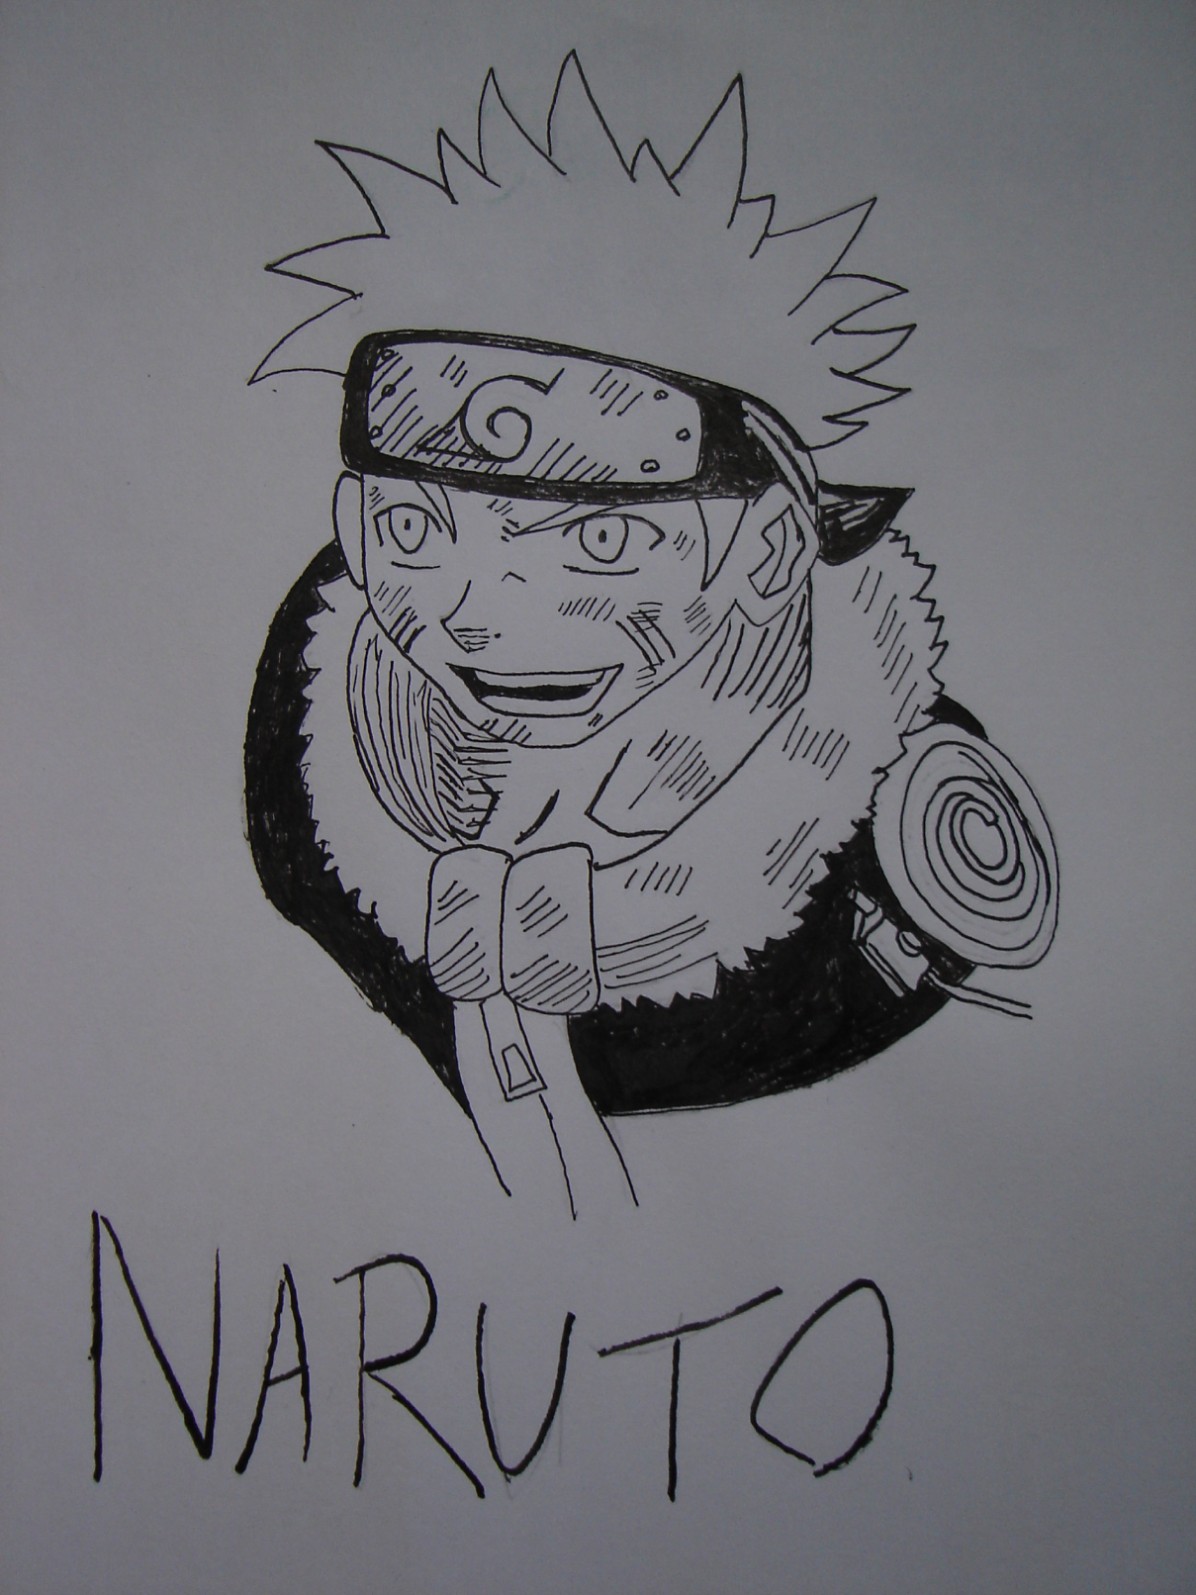 First Naruto pic by Syckitty_88